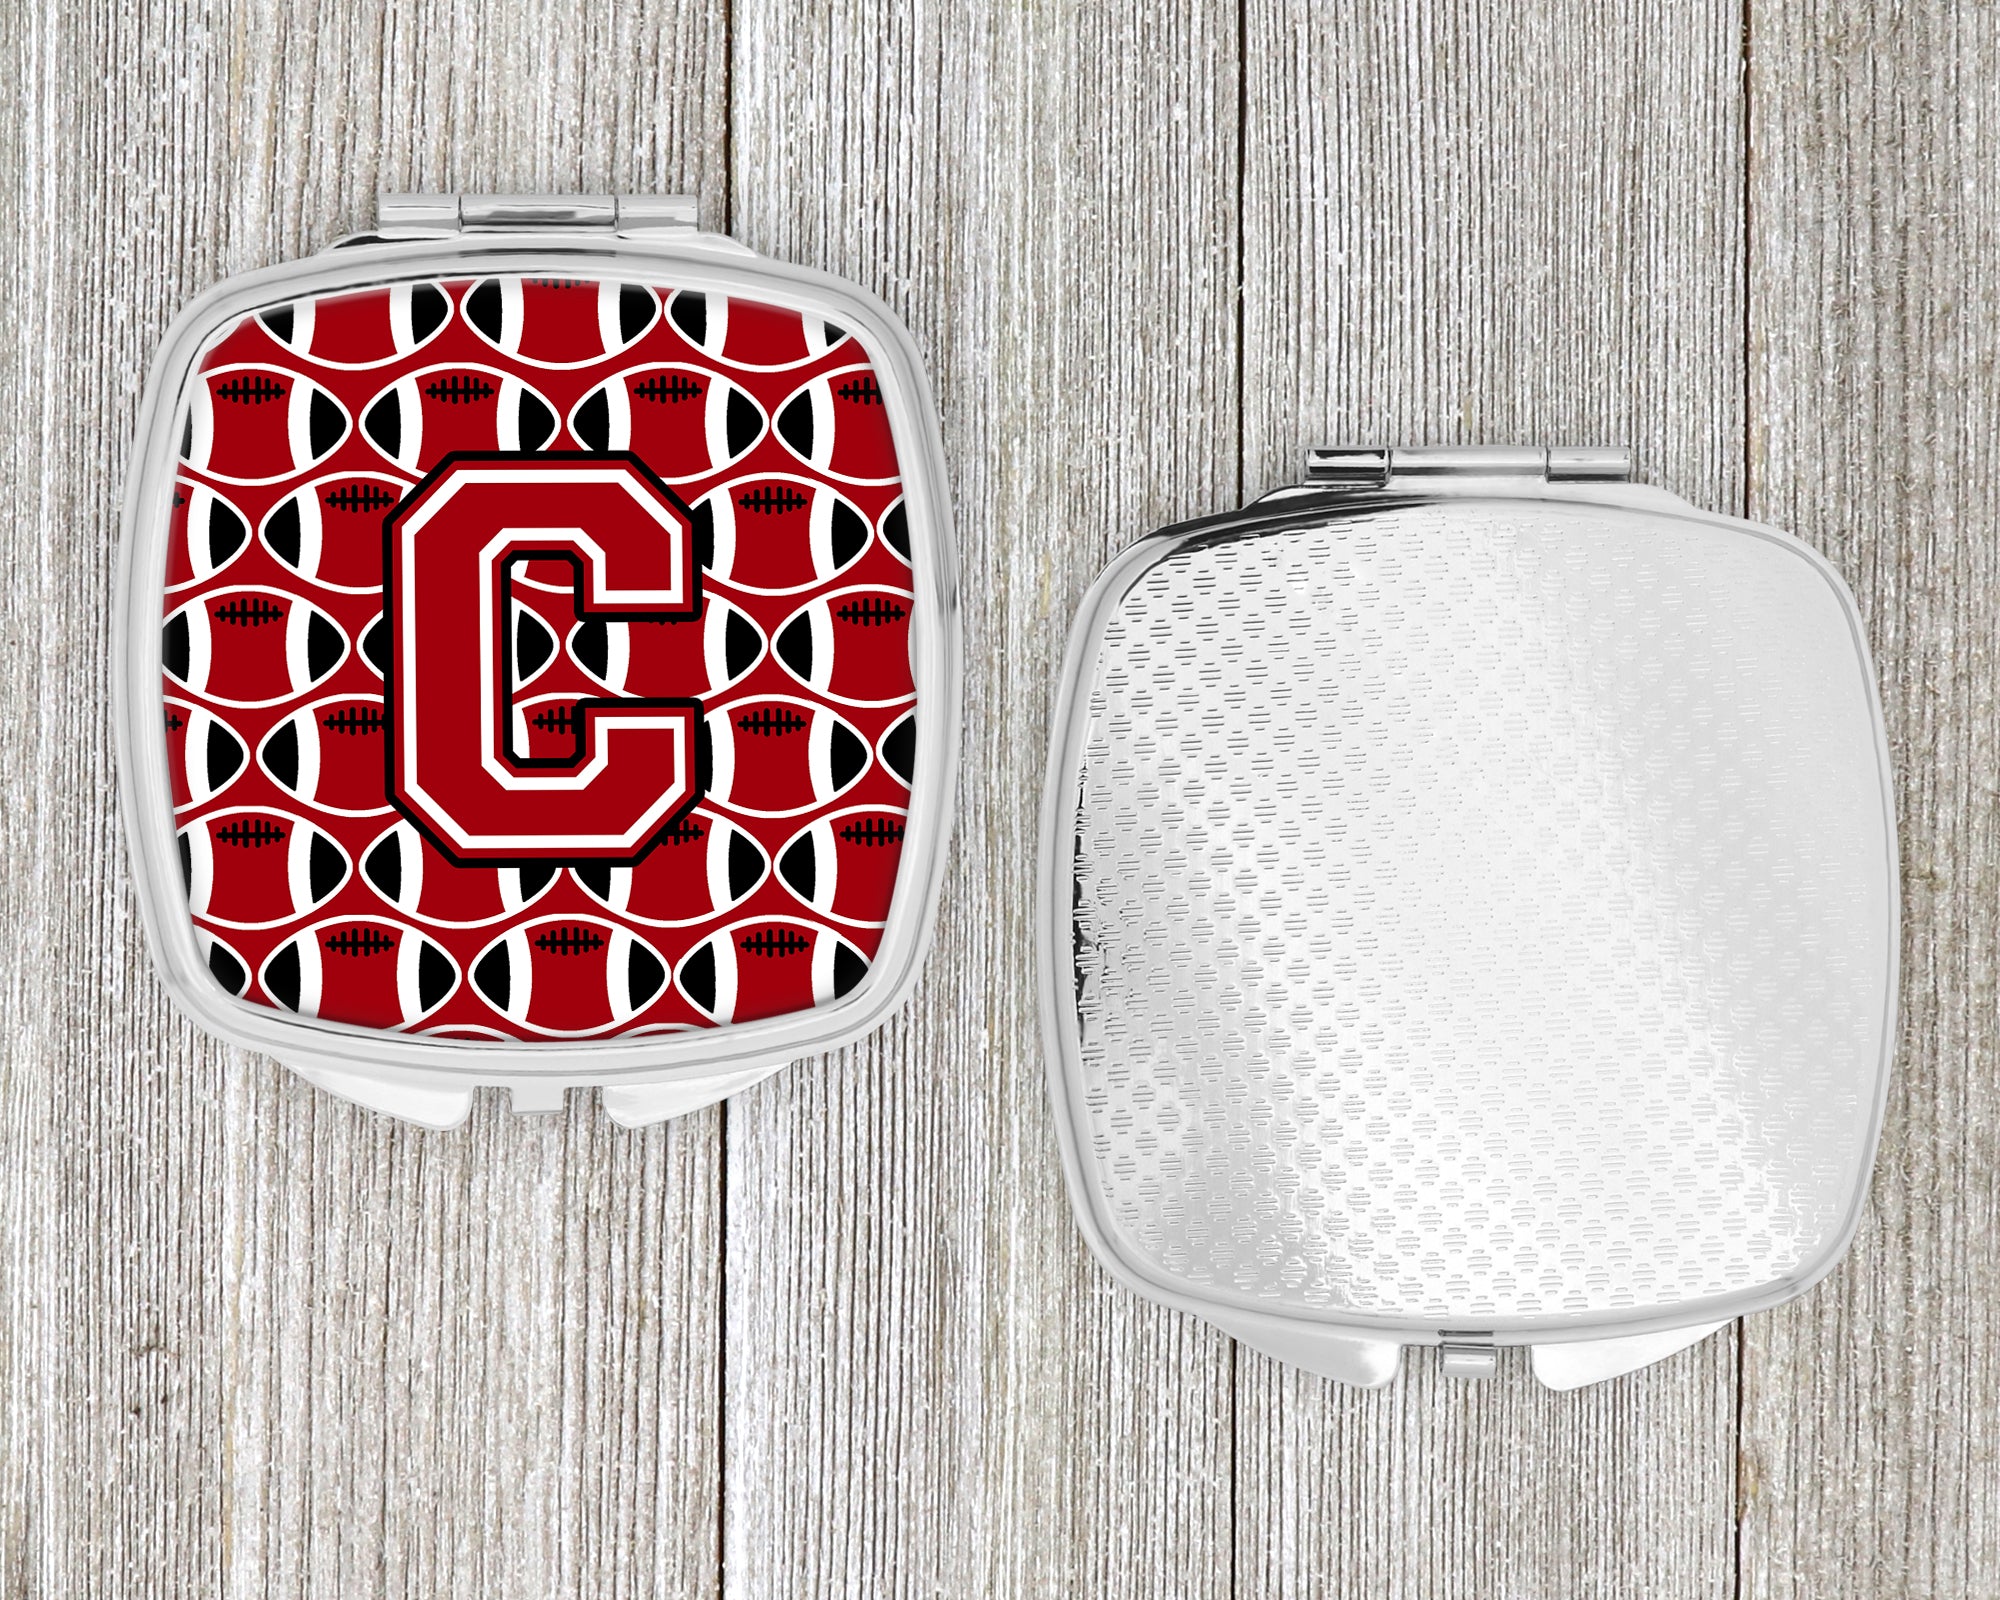 Letter C Football Red, Black and White Compact Mirror CJ1073-CSCM  the-store.com.